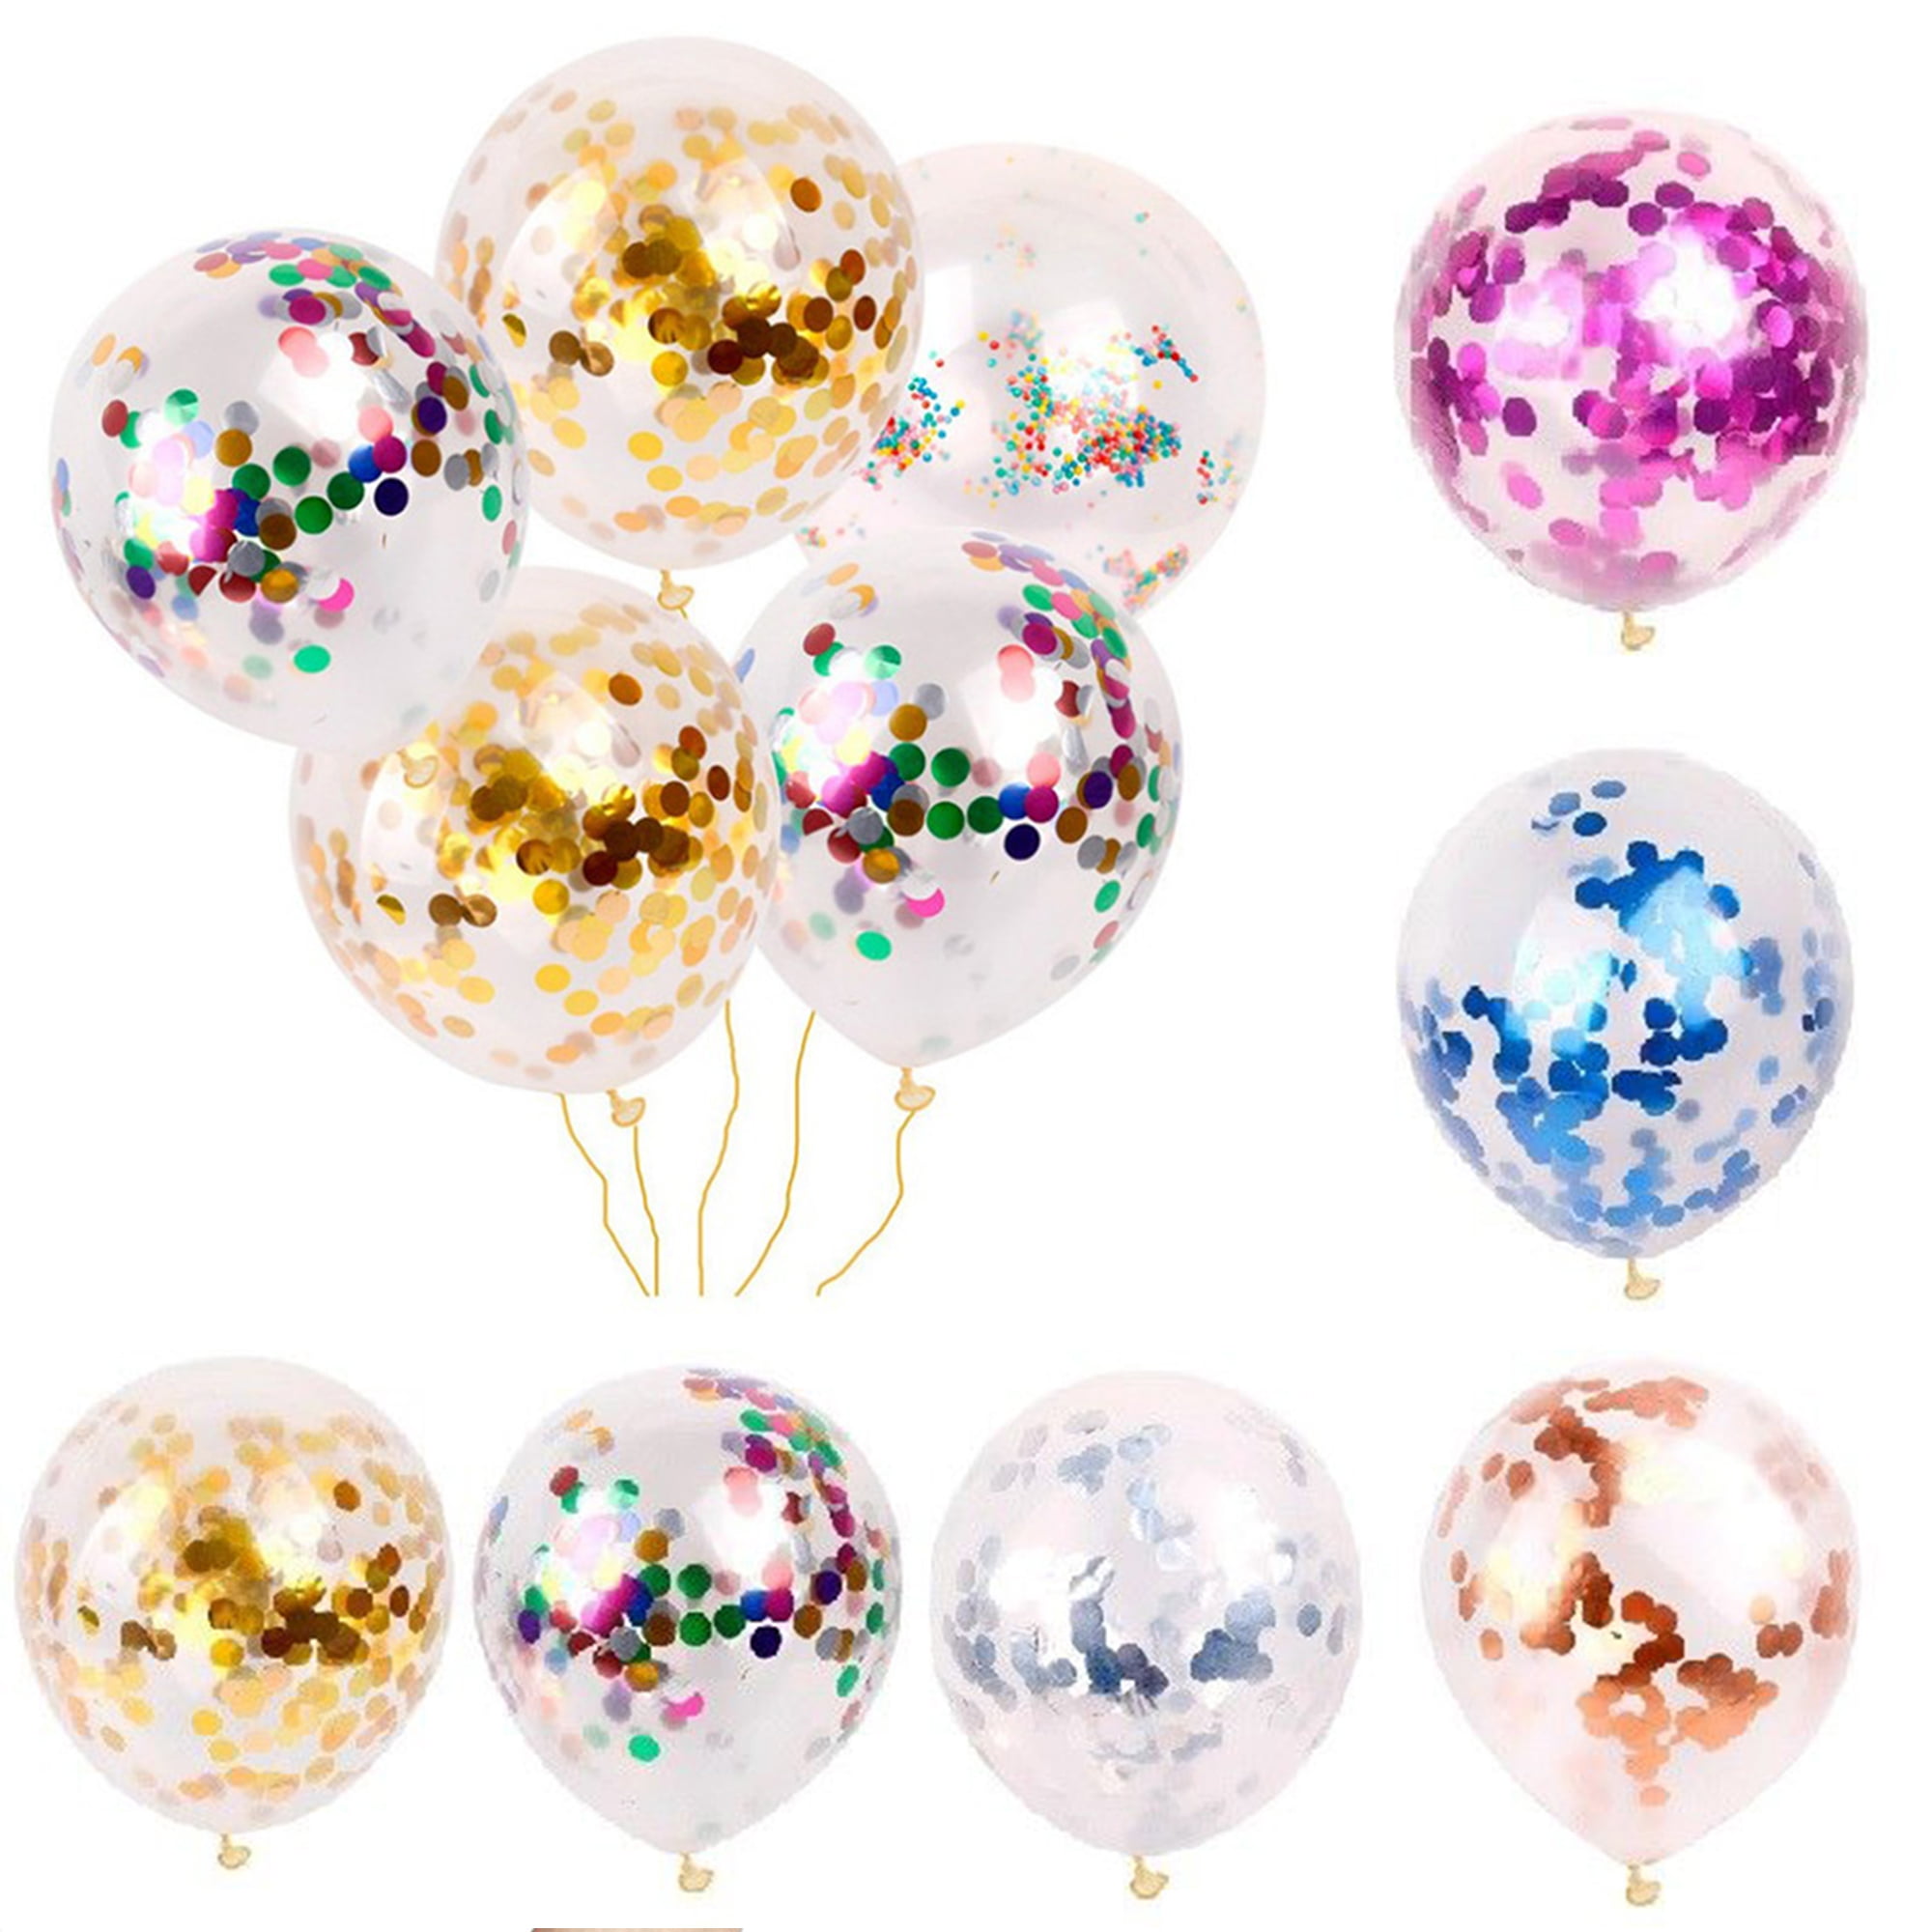 5-10 Round Clear Transparent Color Big Giant Balloon For Party Wedding Easter